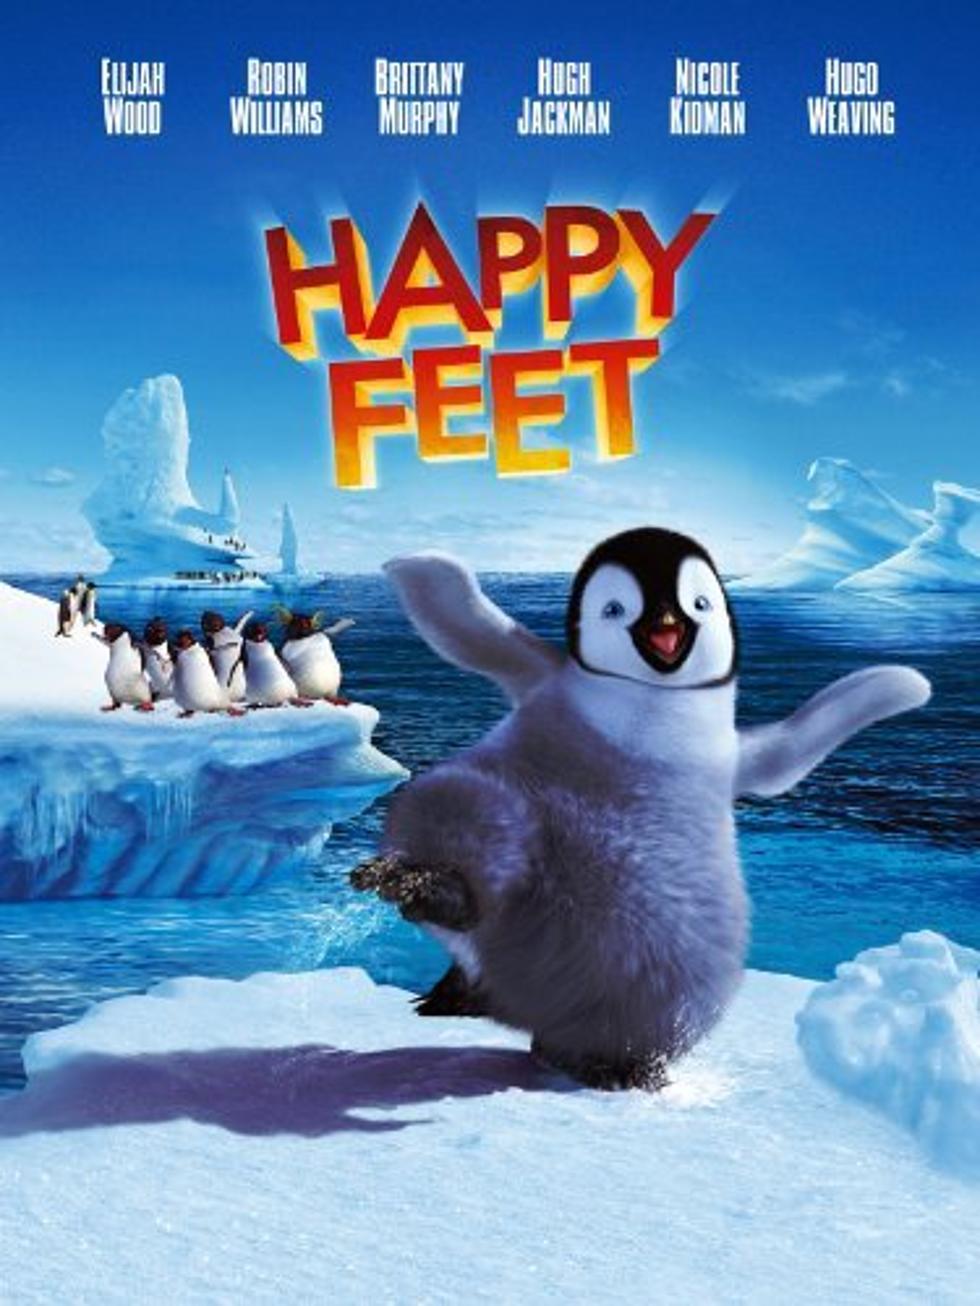 Friday’s Free Downtown Movie Night Features “Happy Feet”